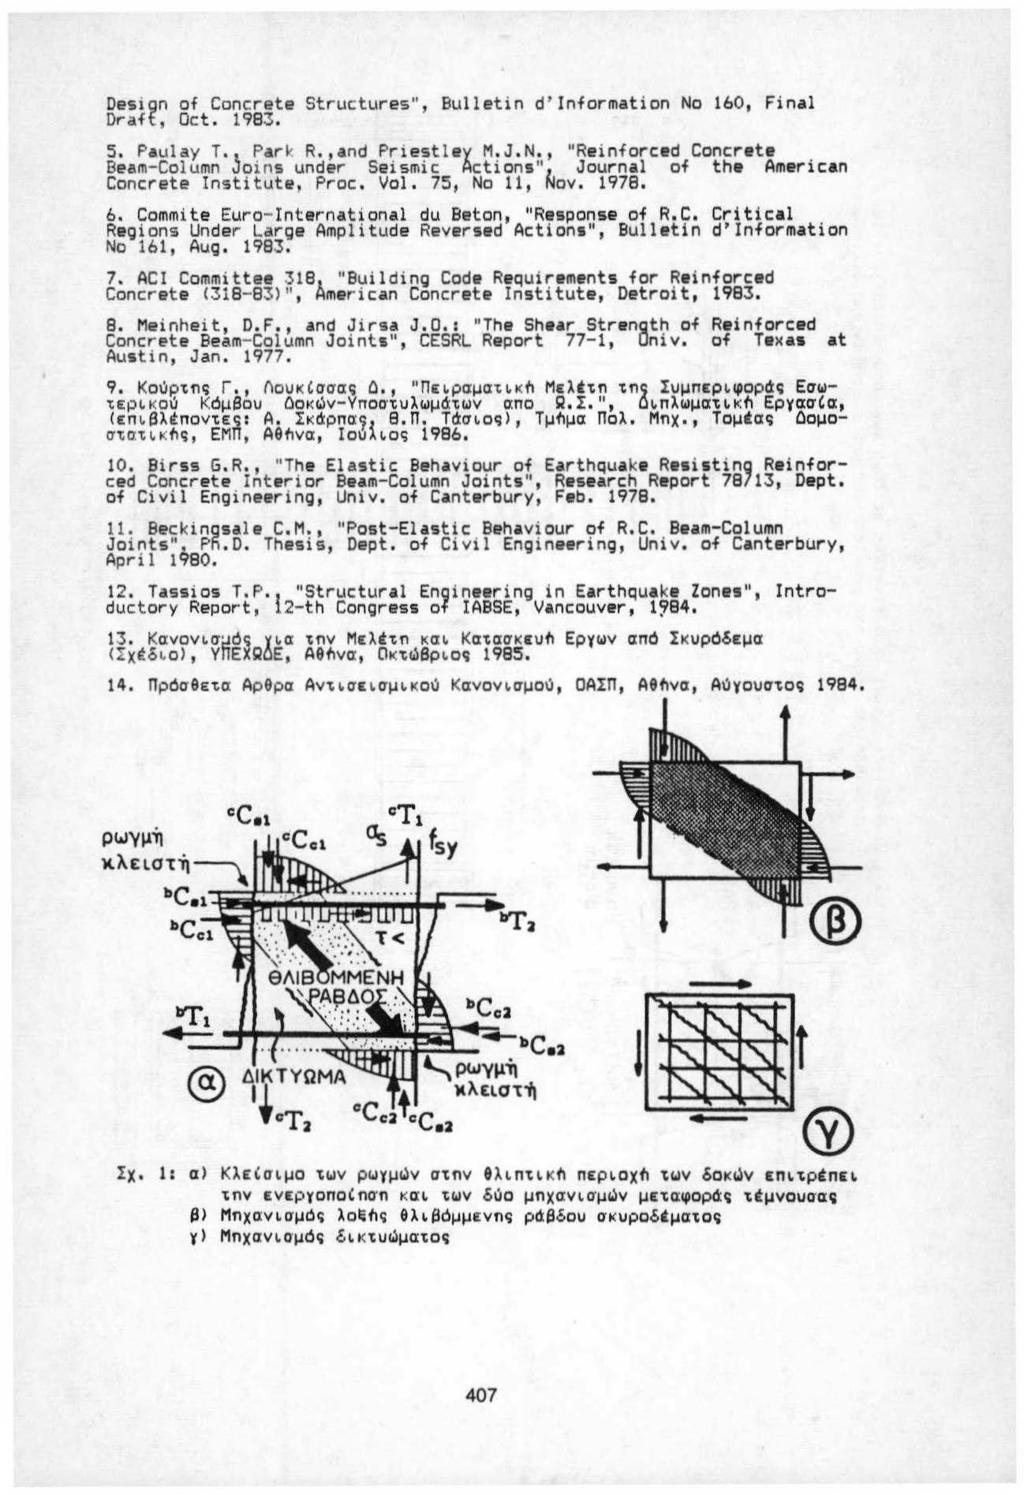 Design of Concrete Structures", Bulletin d'information Νο 160, Final Draft, Oct. 1983. S. P.ιulay Τ. P.irγ R.,and Priestley M.J.N., "Reinforced Concrete Beam-Column joins under Seismic Actions" 1.